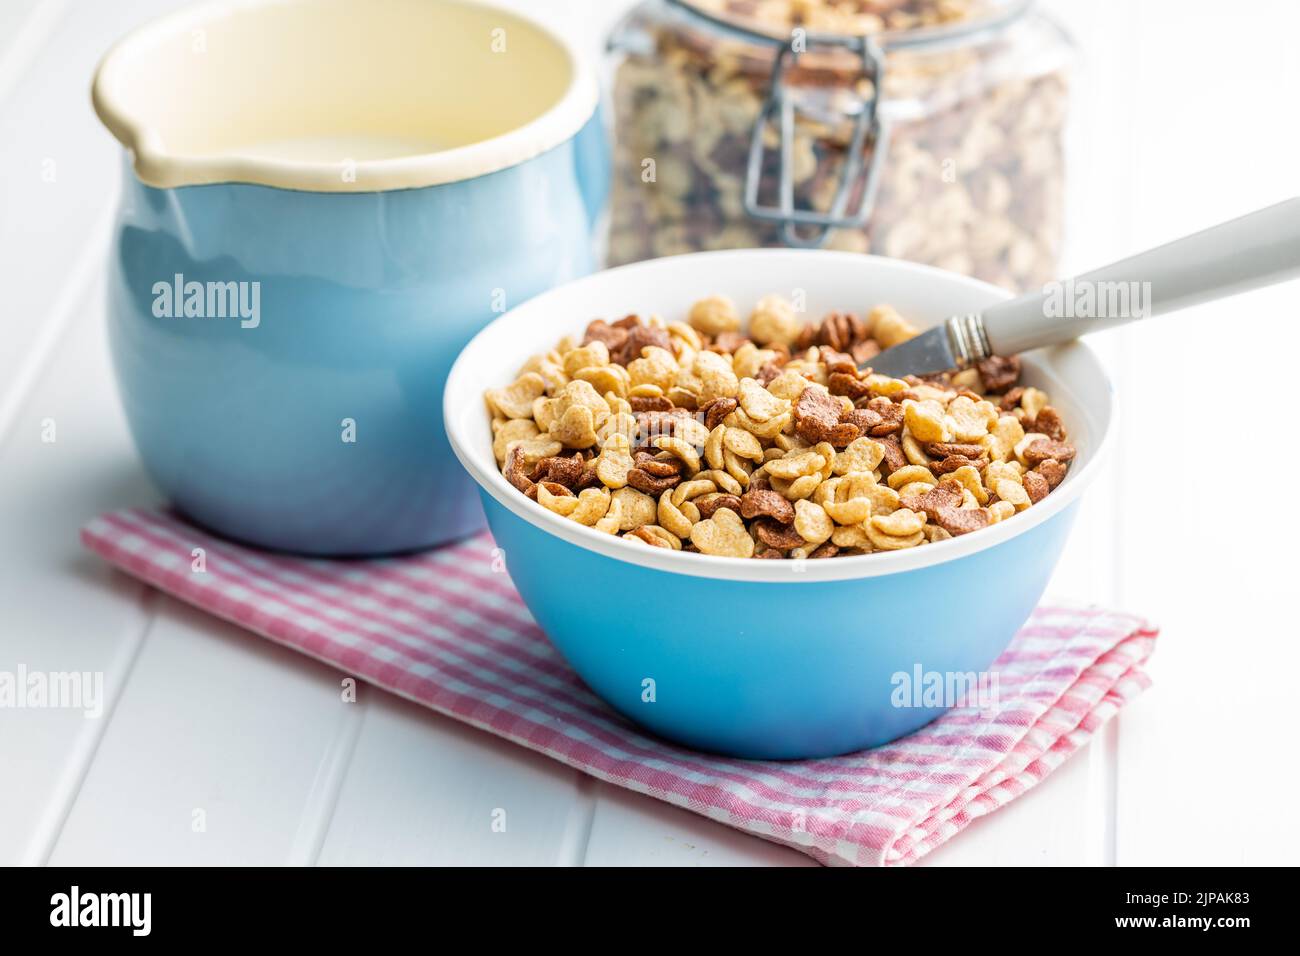 Breakfast cereal flakes in a bowl and milk on checkered napkin. Stock Photo